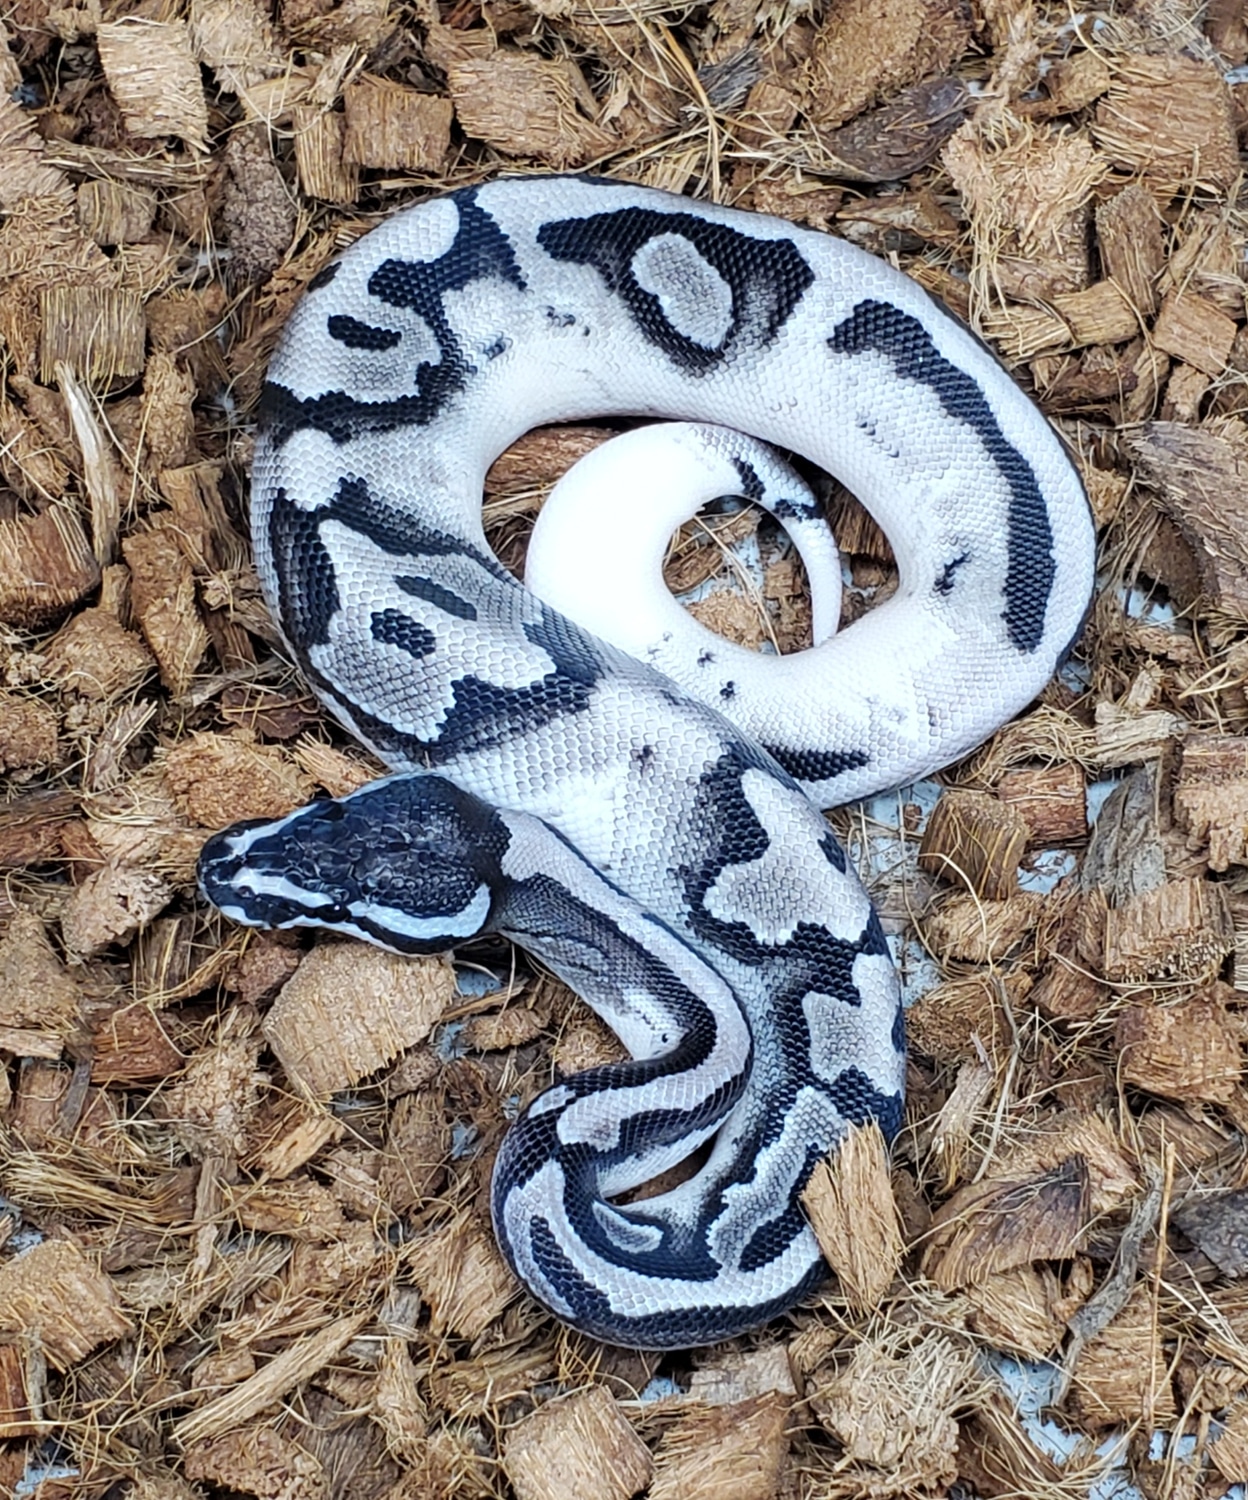 Axanthic Pied Ball Python by Exiled Reptiles